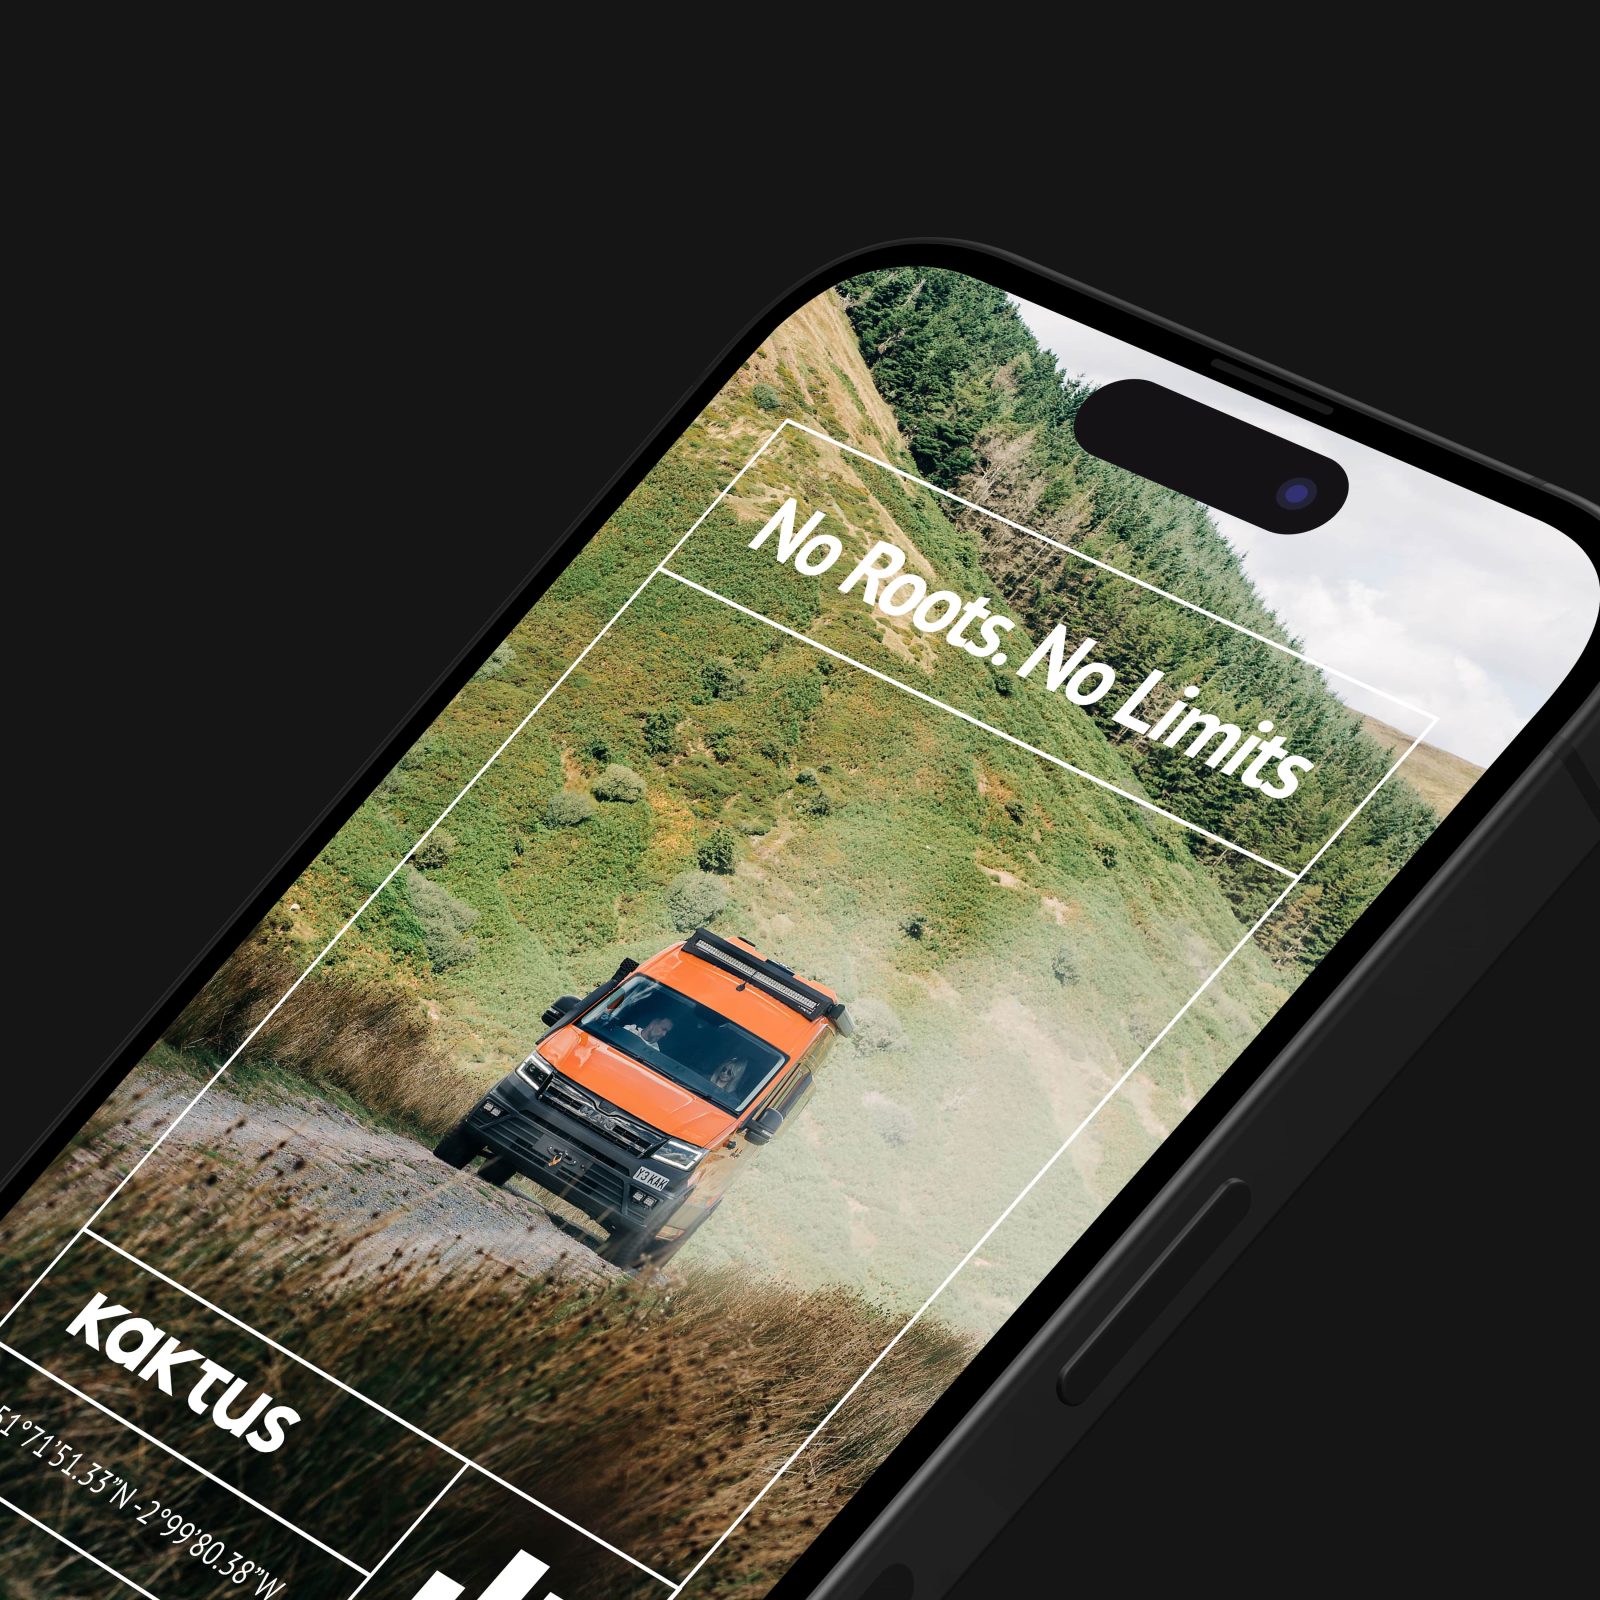 Smartphone displaying an adventurous ad featuring an off-road truck on a muddy field under the tagline 